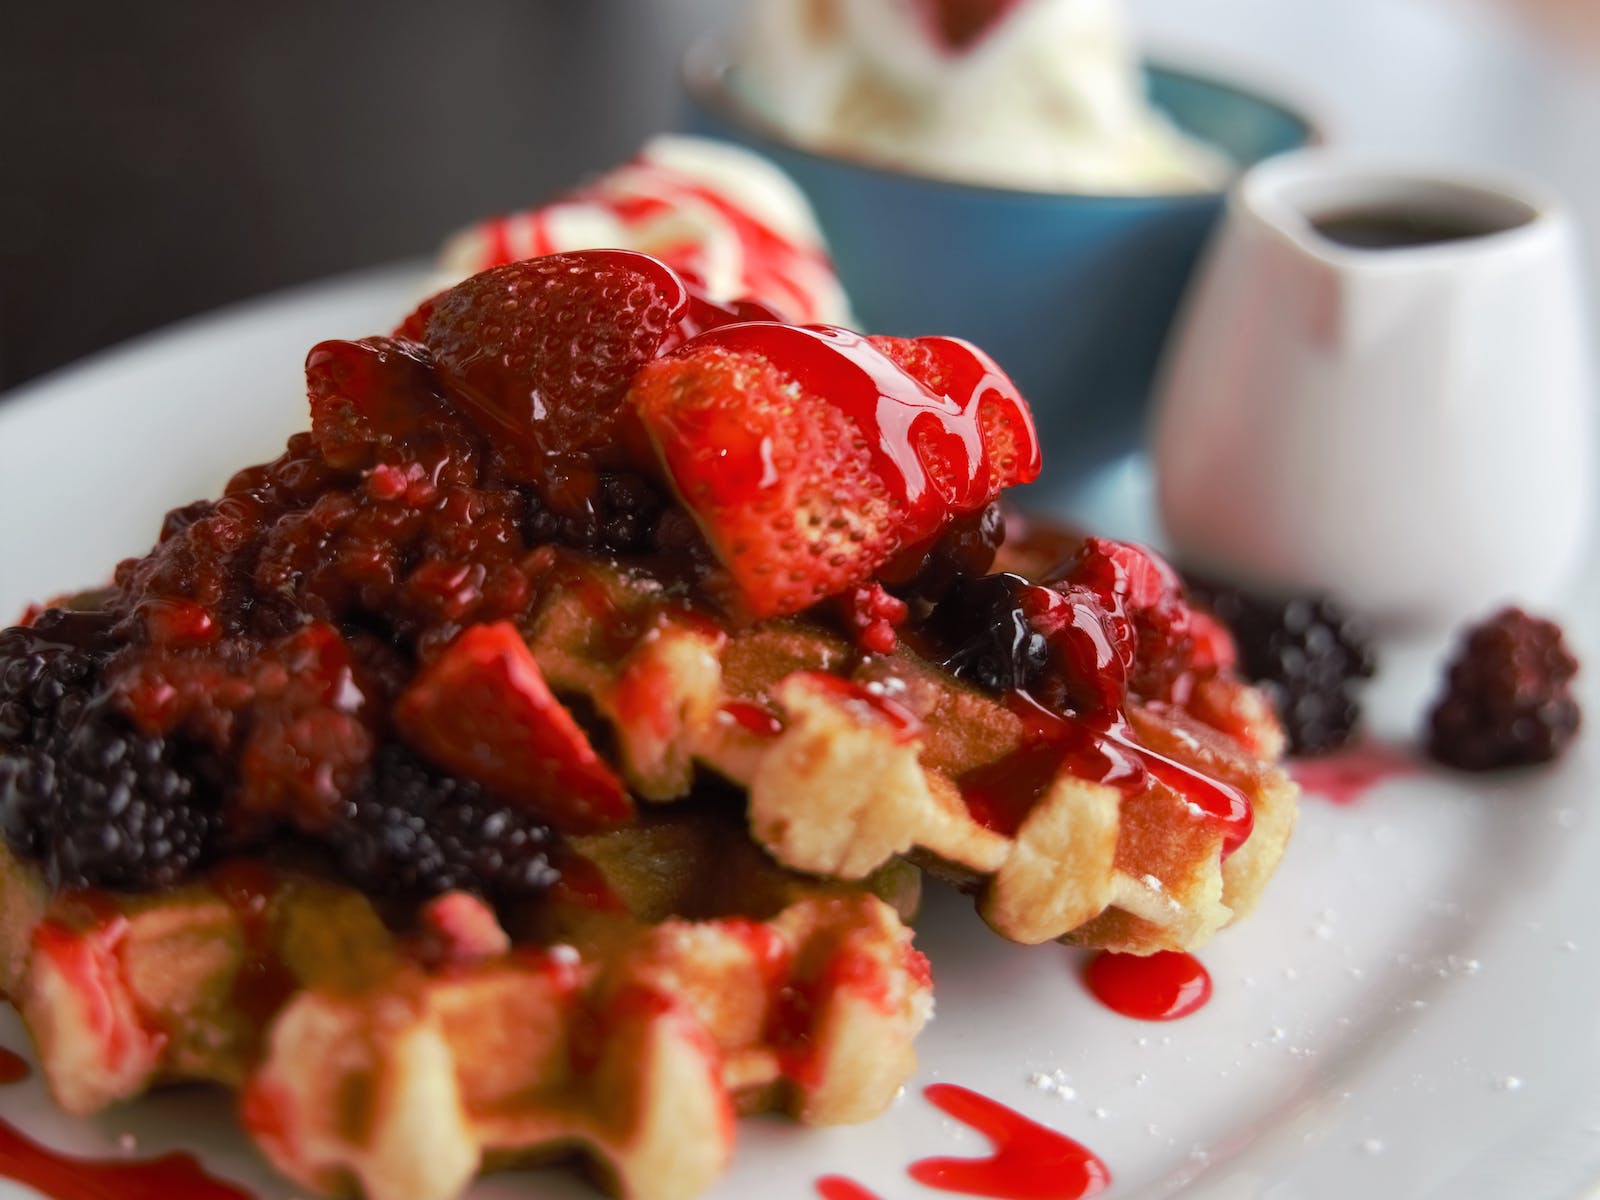 Waffles with mixed berries, The Retro Diner